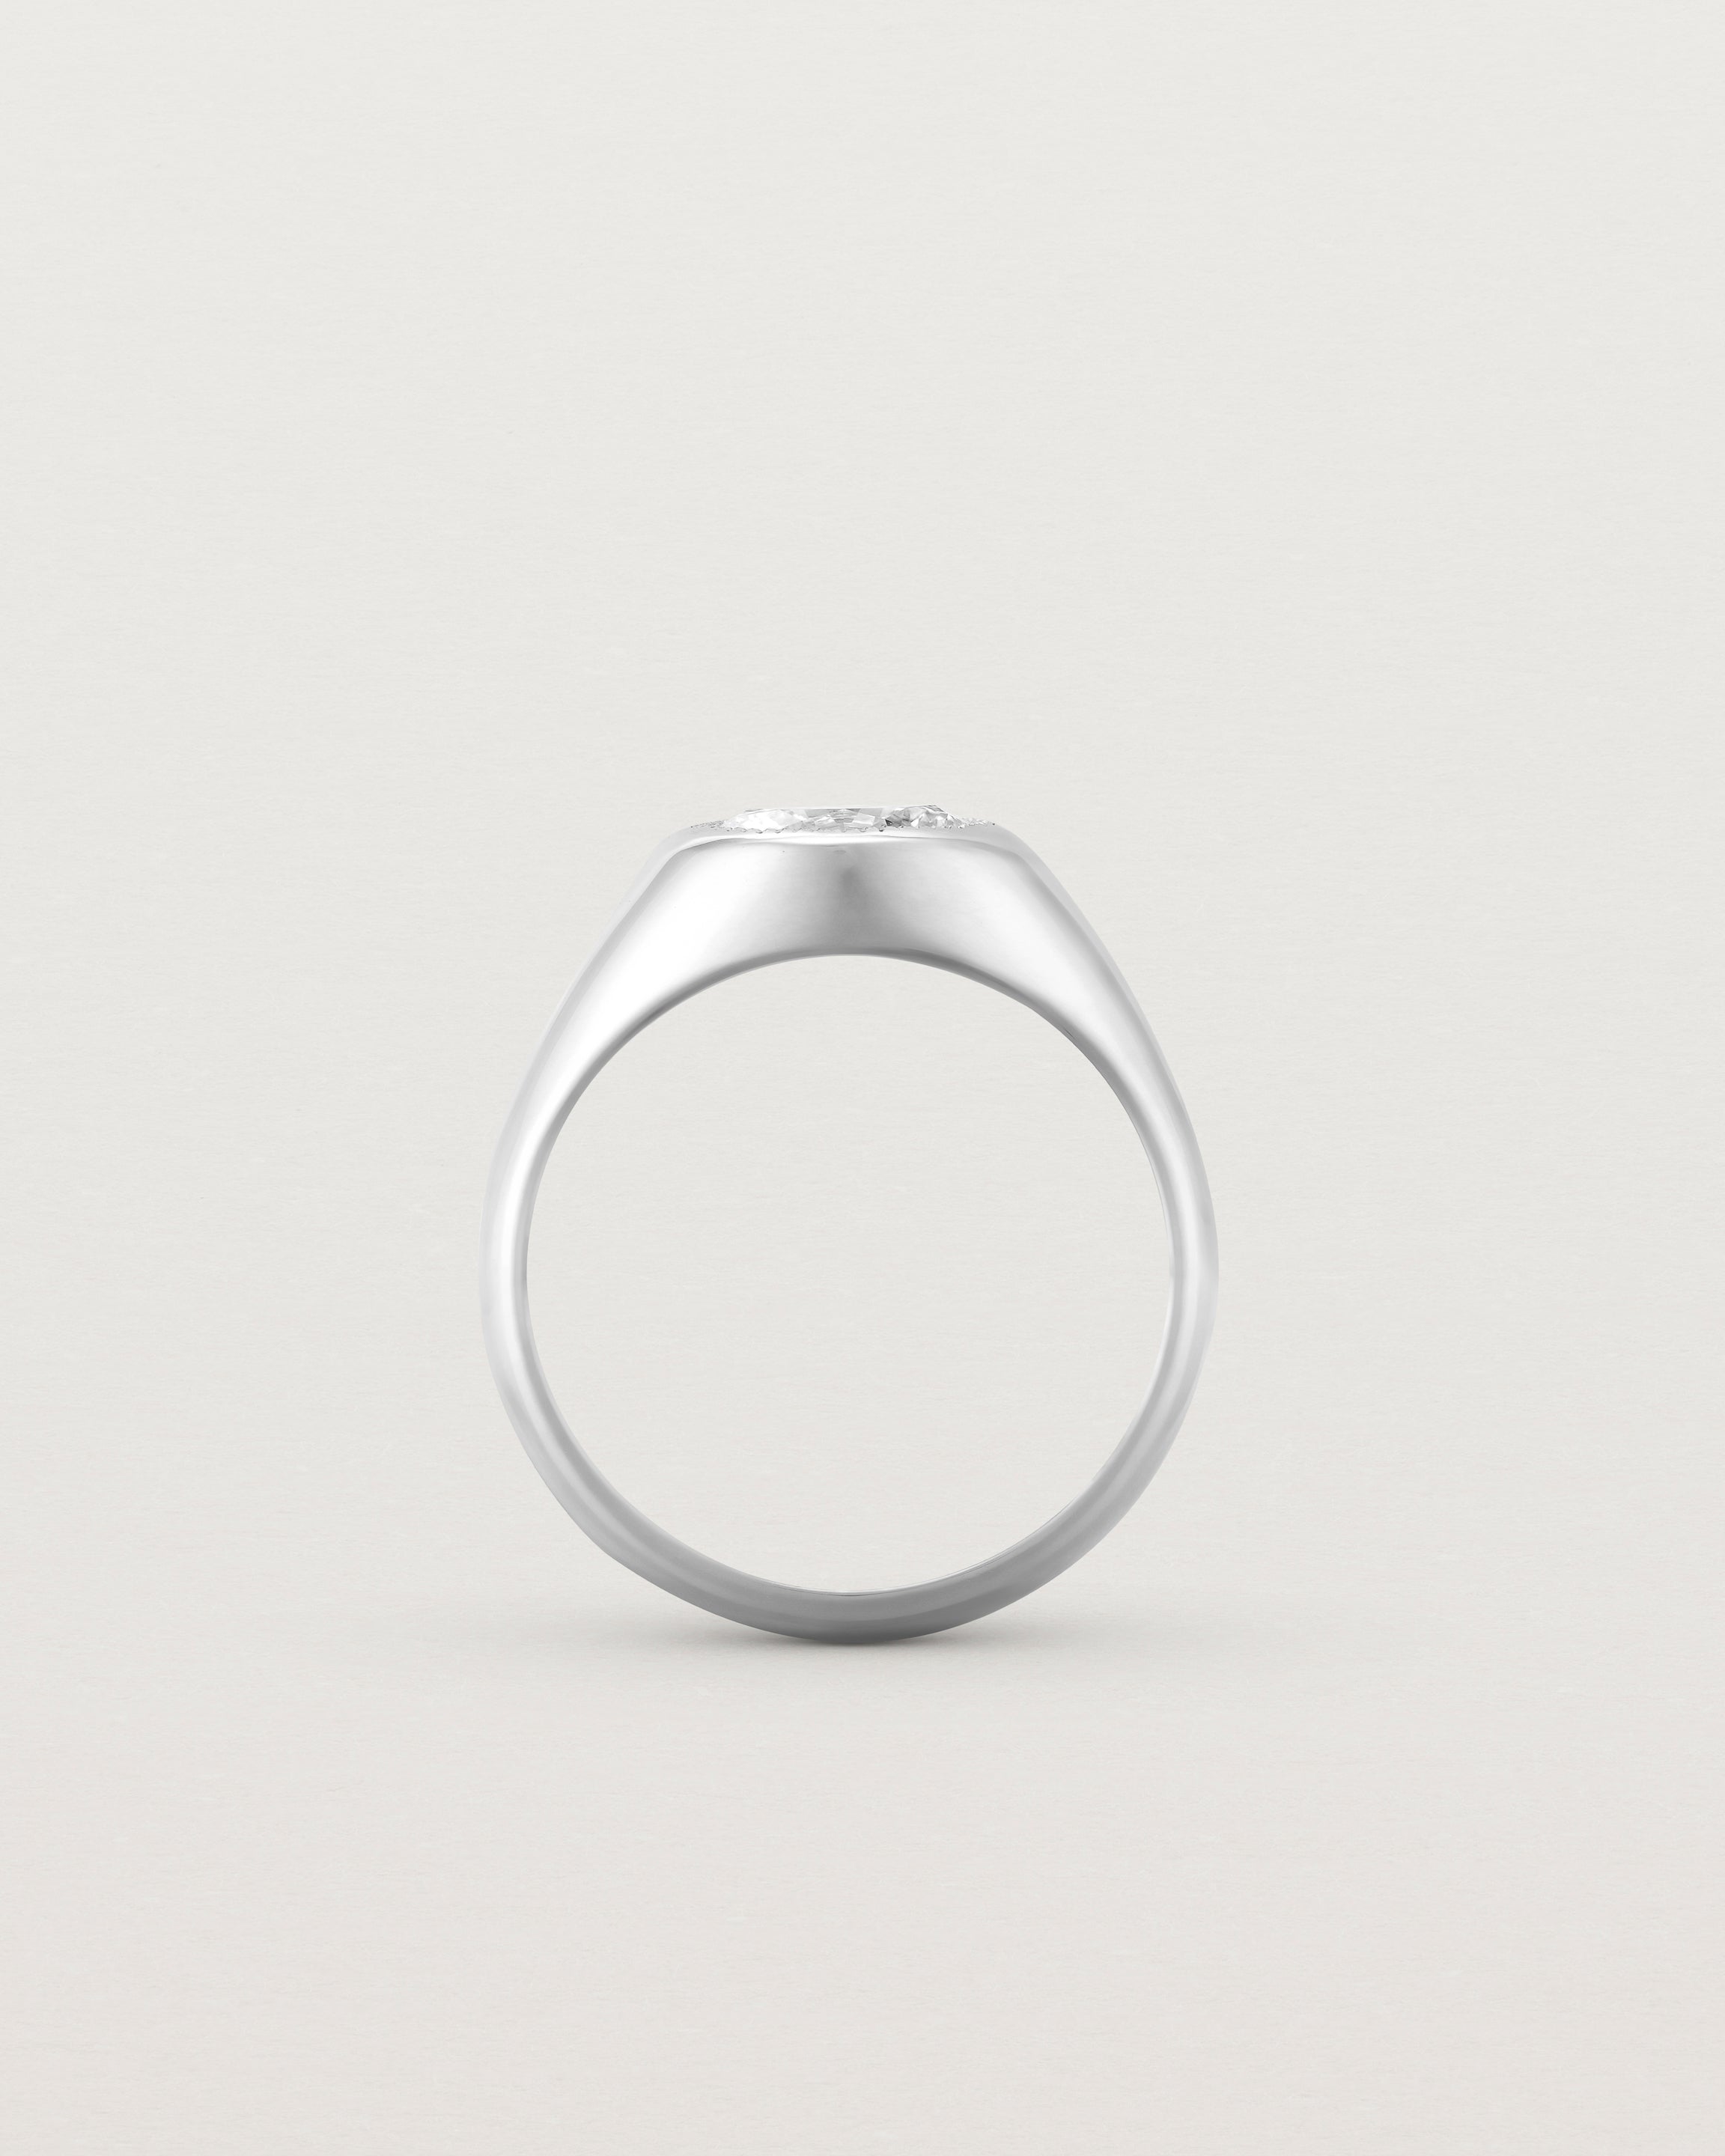 Standing view of the Átlas Oval Signet | Laboratory Grown Diamond in white gold, with a polished finish.